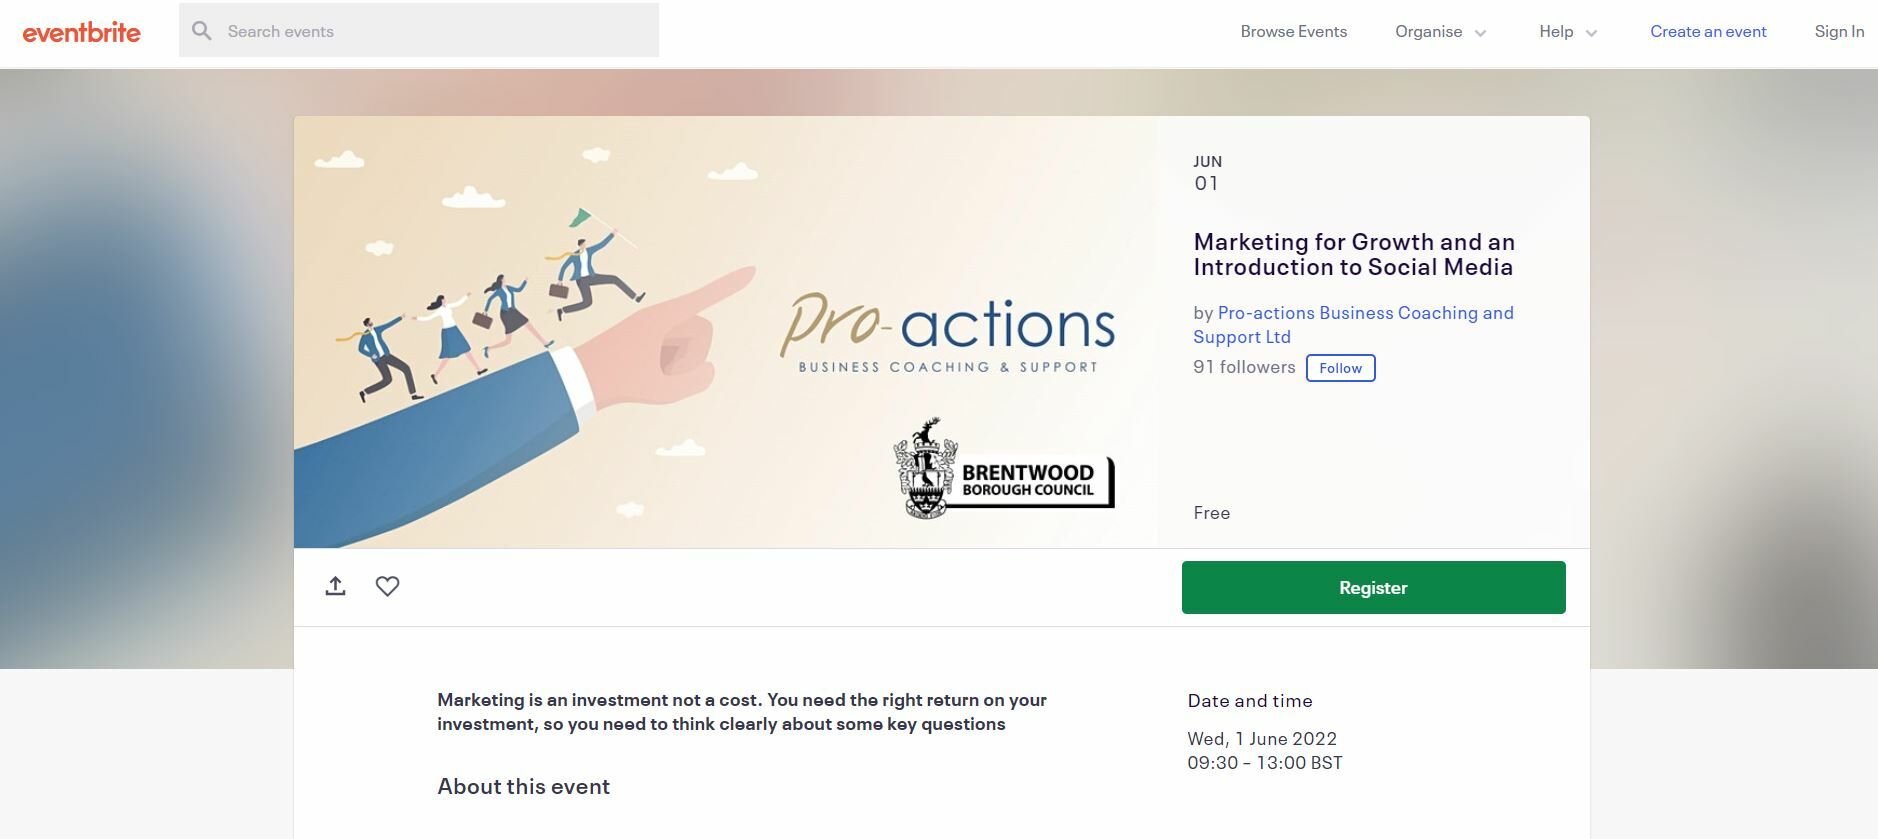 Pro-actions: Marketing for Growth and an Introduction to Social Media.